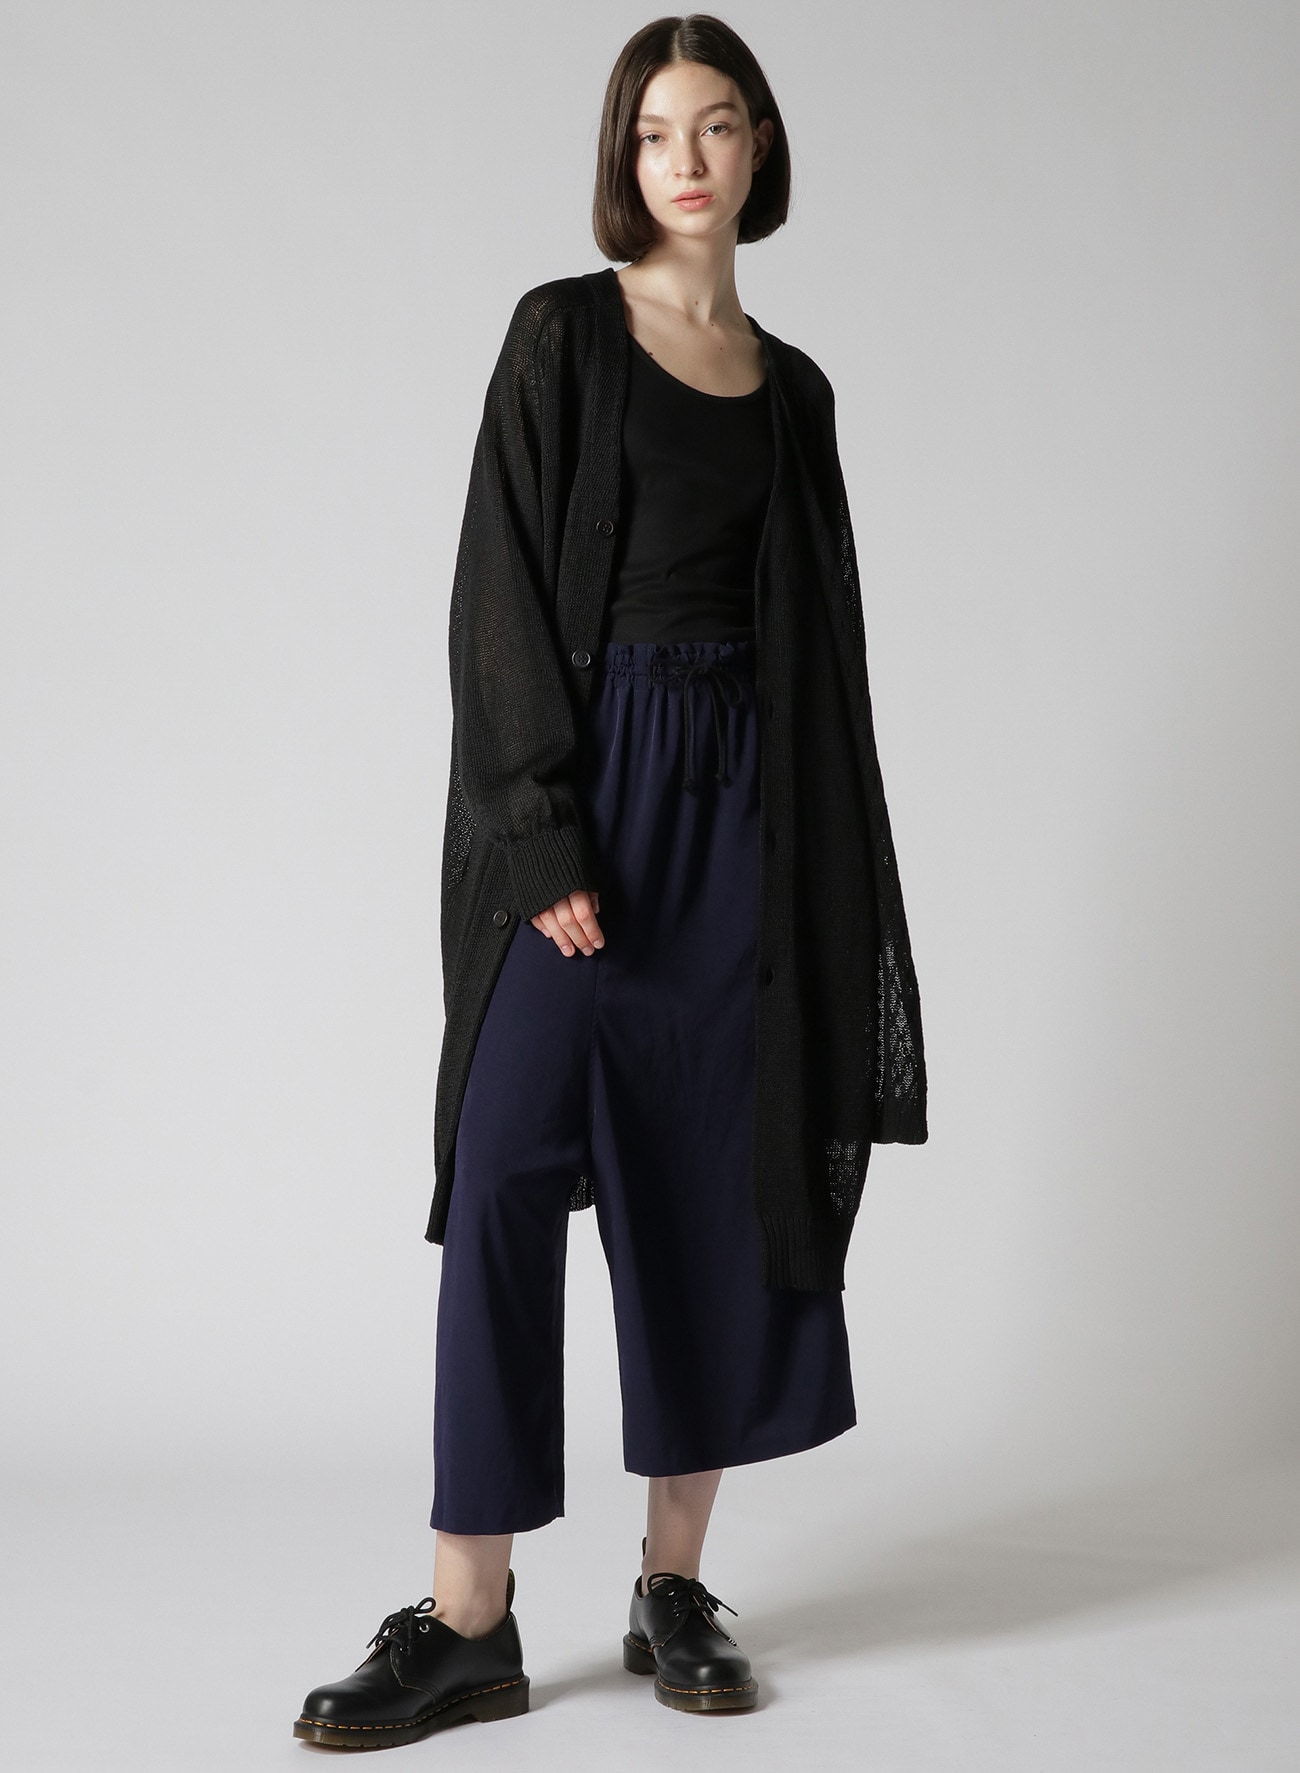 TRIACETATE POLYESTER CREPE de CHINE FRONT TUCK THICK PANTS